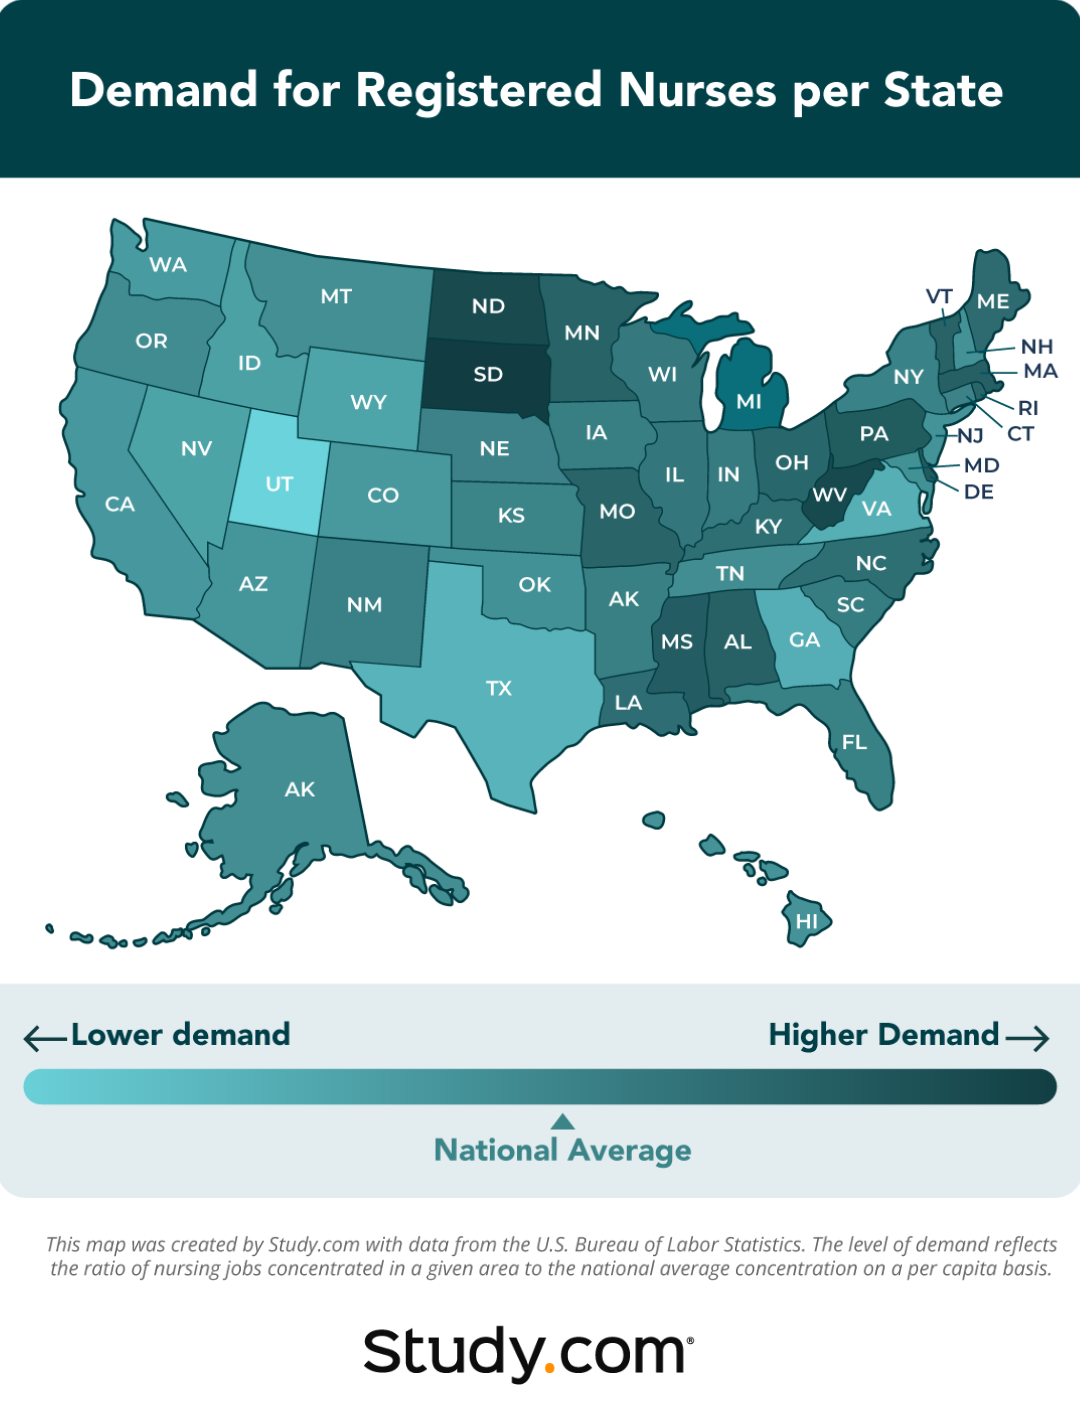 Heat map showing the demand for registered nurses per state.